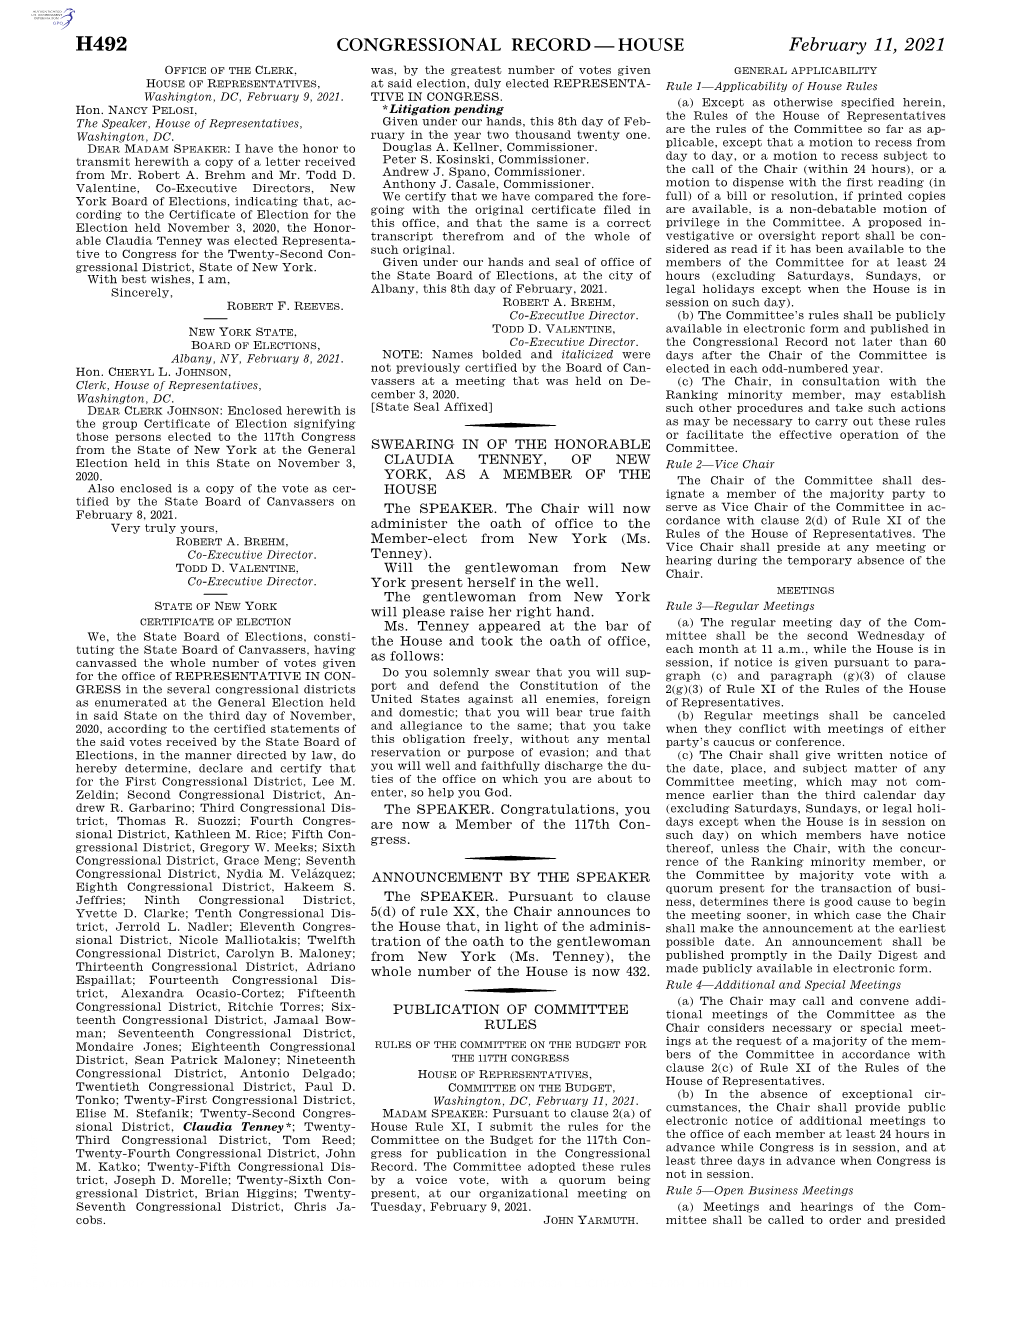 Congressional Record—House H492